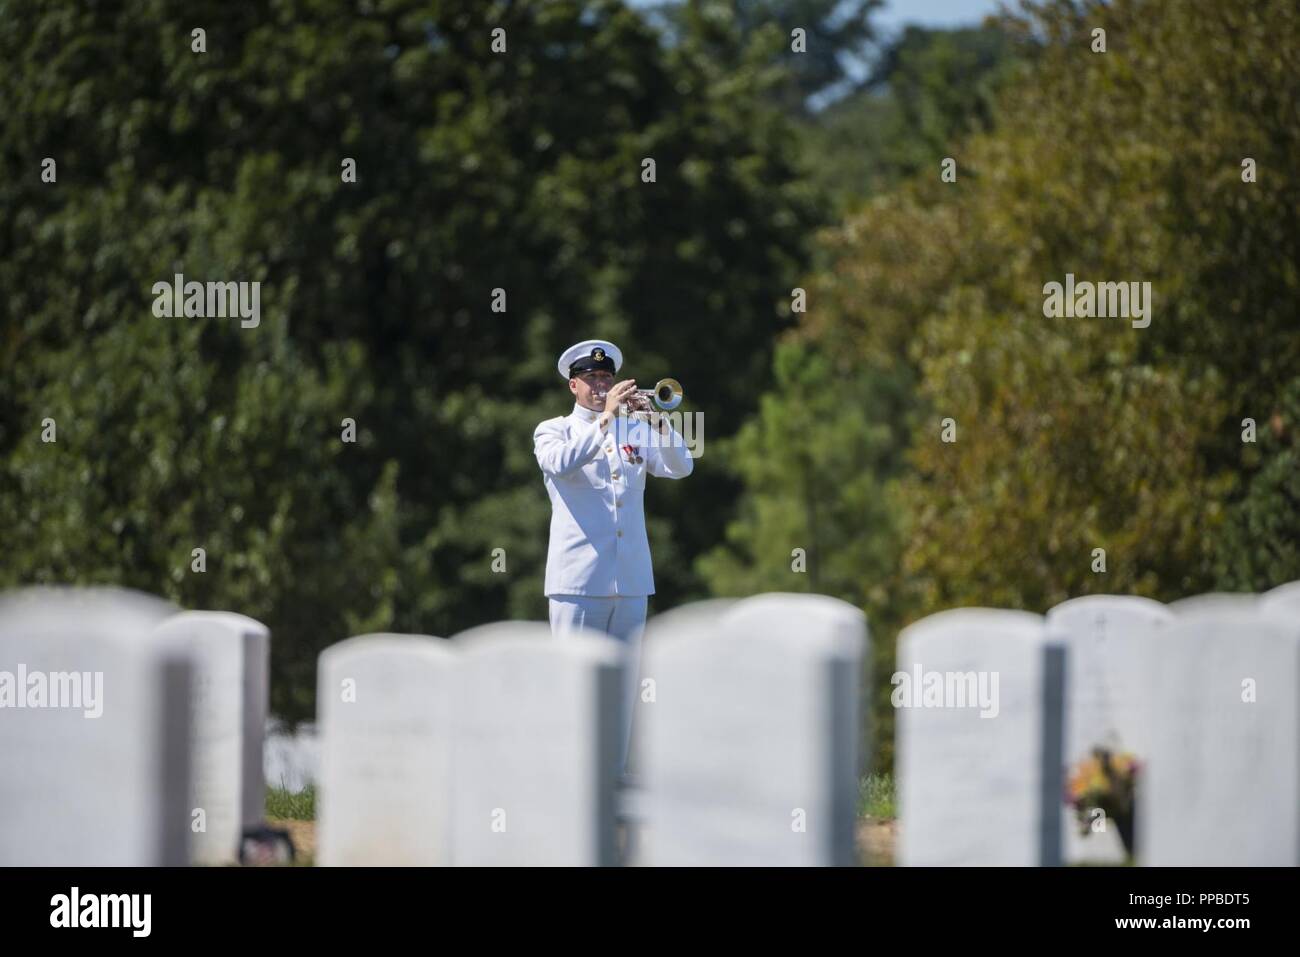 U.S Navy Musician 1st Class Ethan Bartley from The U.S. Navy Band plays Taps during the full honors funeral of U.S. Navy Lt. Commander William Liebenow in Section 62 of Arlington National Cemetery, Arlington, Virginia, August 23, 2018. On August 7, 1943, Liebenow skippered a patrol torpedo boat to rescue the sailors of PT-109 who had survived several days on inhospitable islands after a Japanese destroyer had rammed their boat, killing two crewmen. Among those rescued was Liebenow’s bunkmate, John F. Kennedy, then 26. For his acts of heroism during World War II, he received the Bronze and Silv Stock Photo